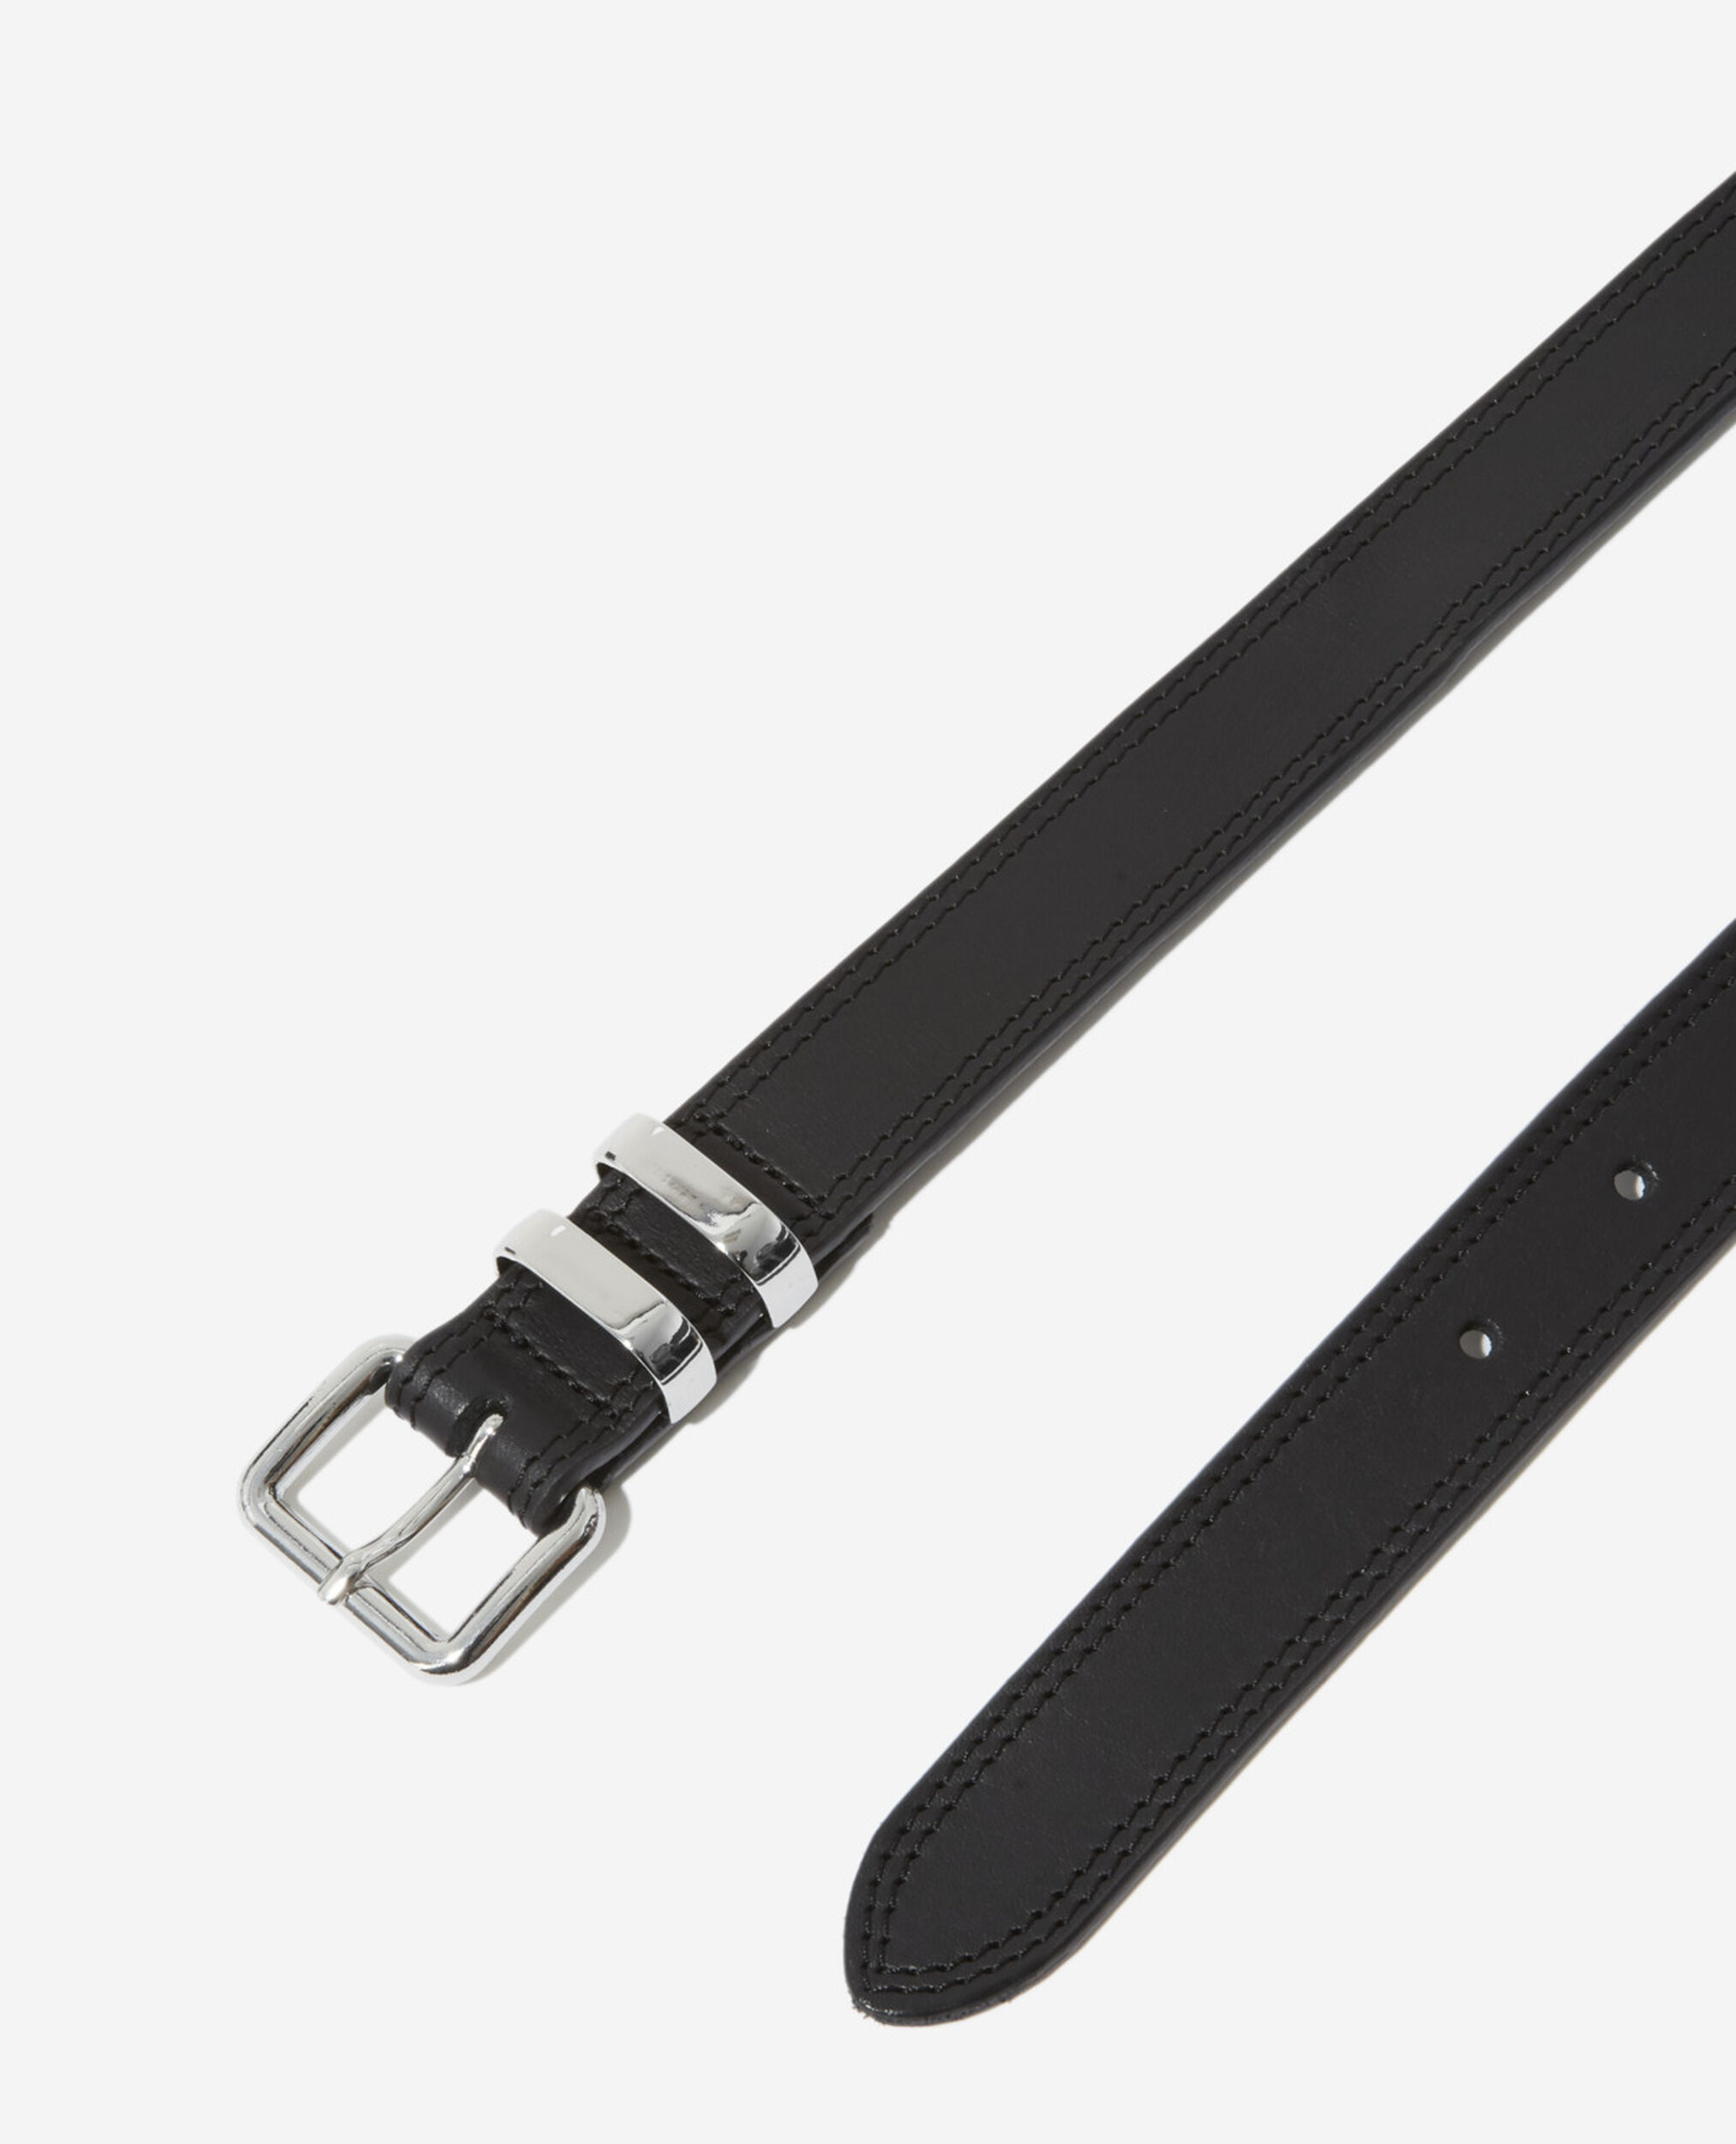 Thin leather belt with single black buckle, BLACK, hi-res image number null